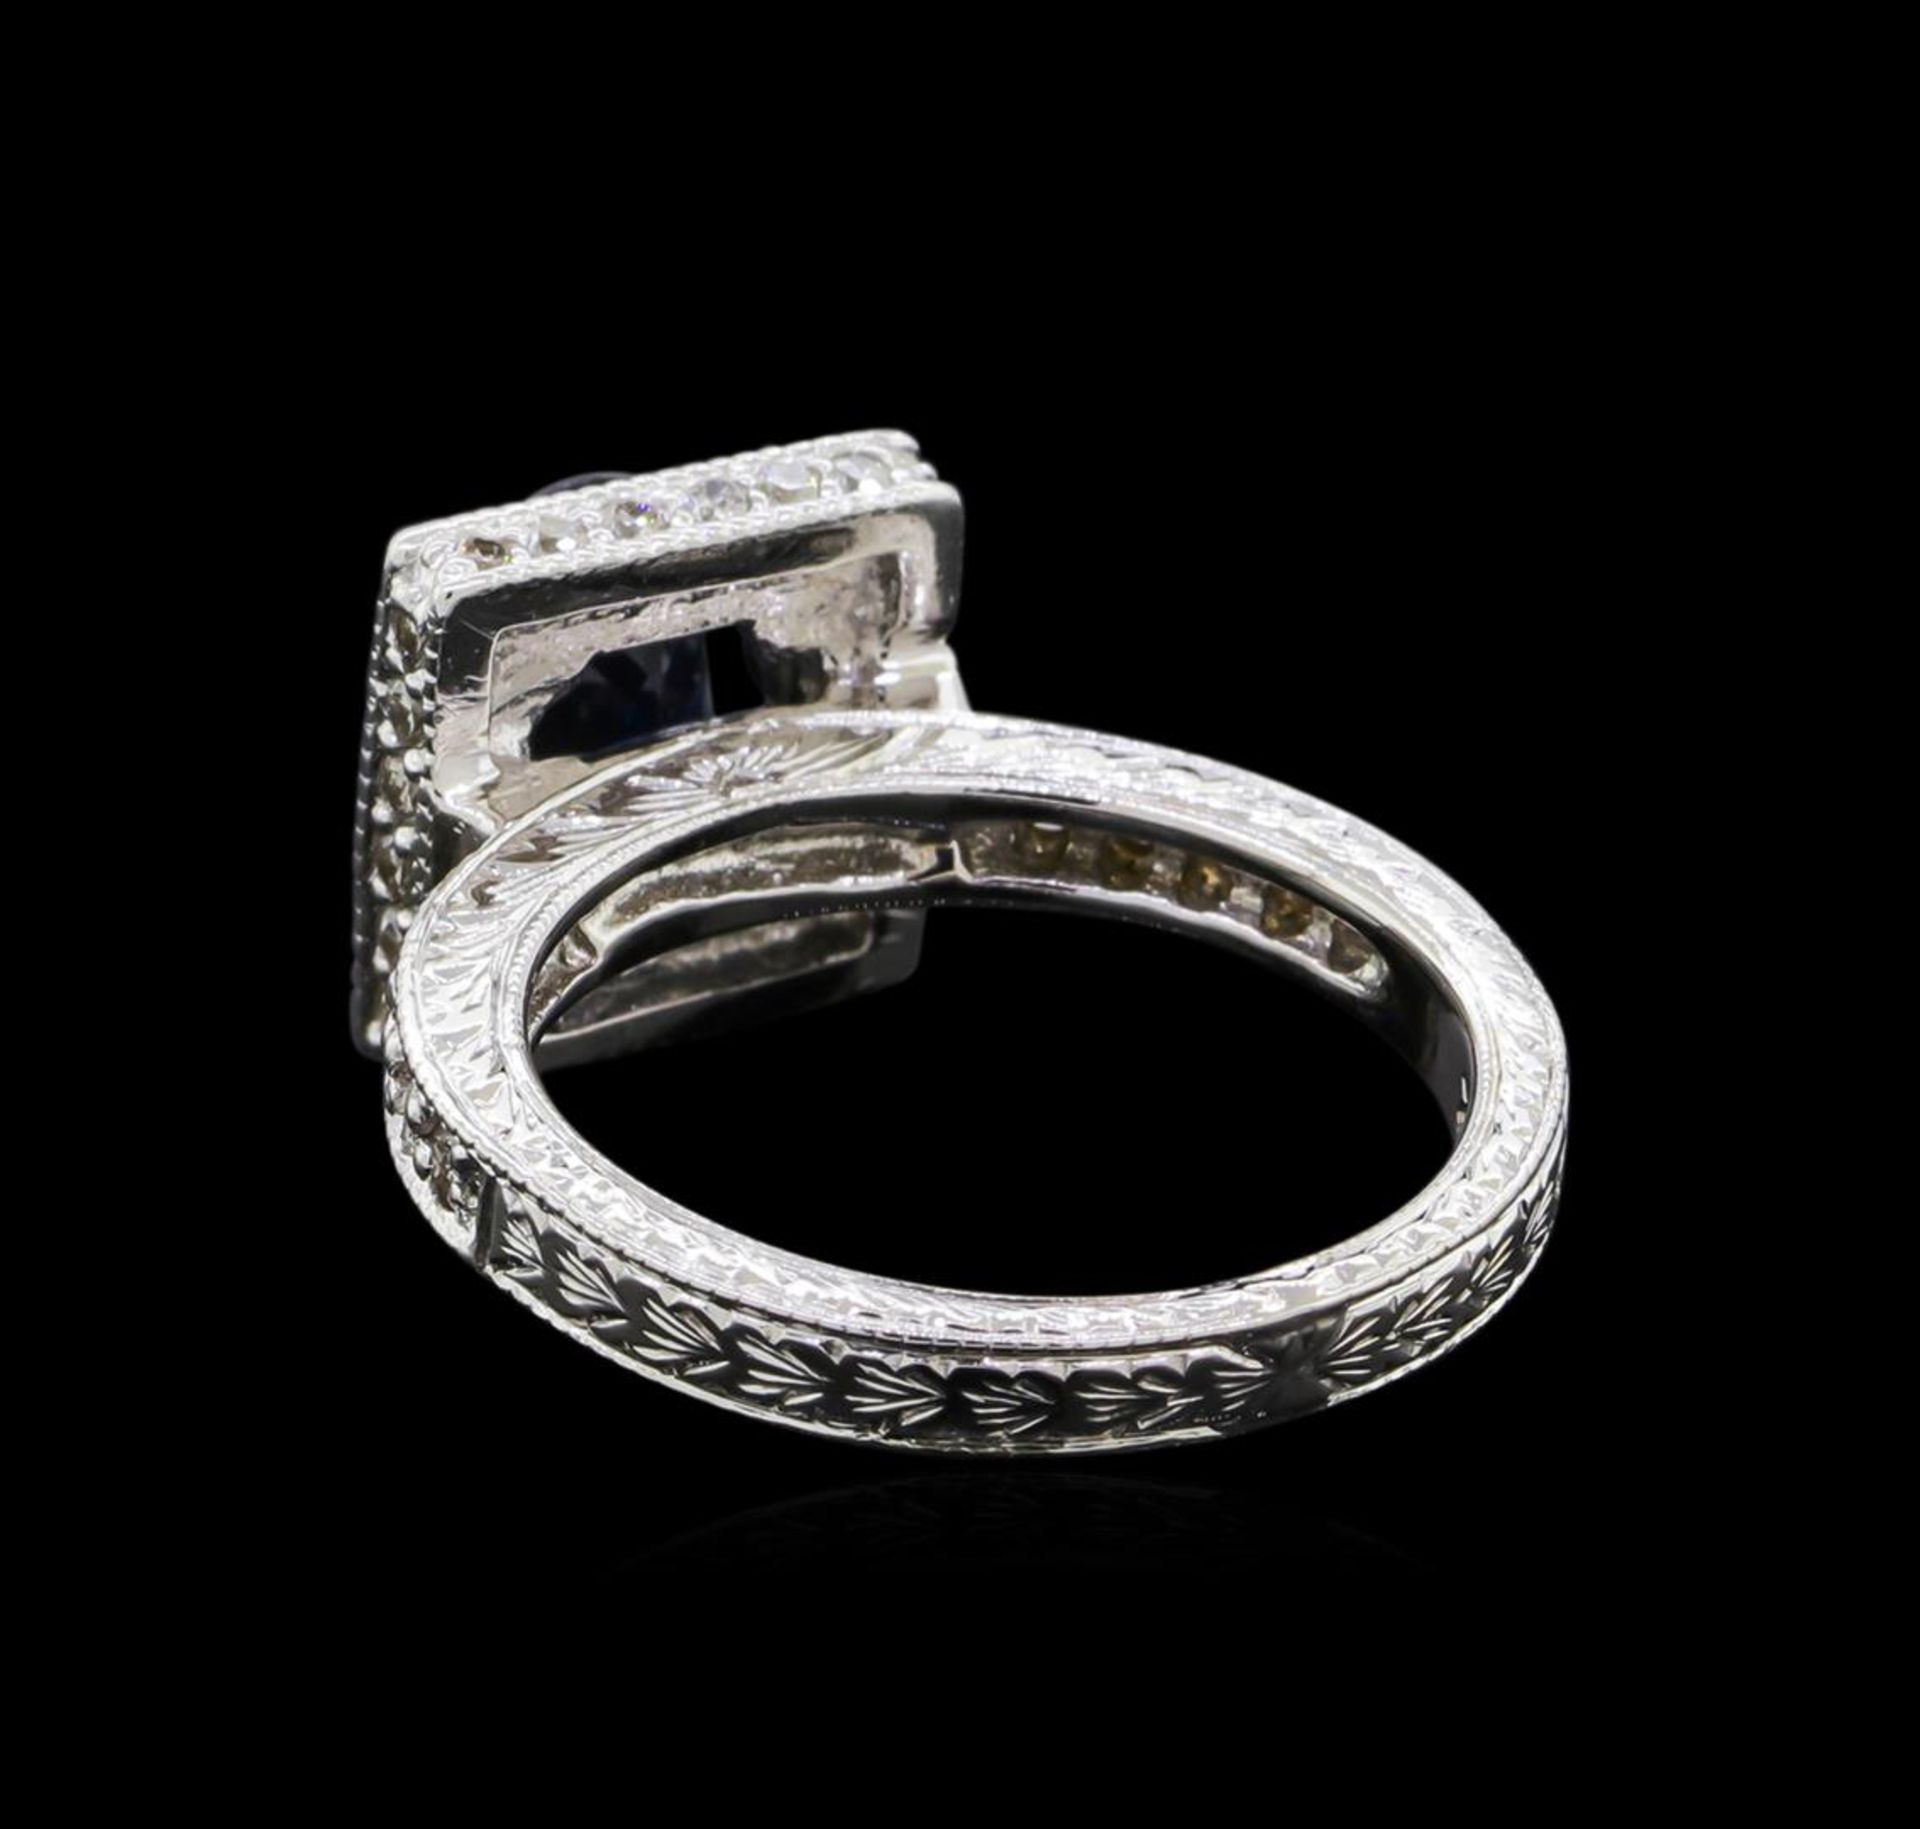 1.68 ctw Sapphire and Diamond Ring - 14KT White Gold - Image 3 of 4